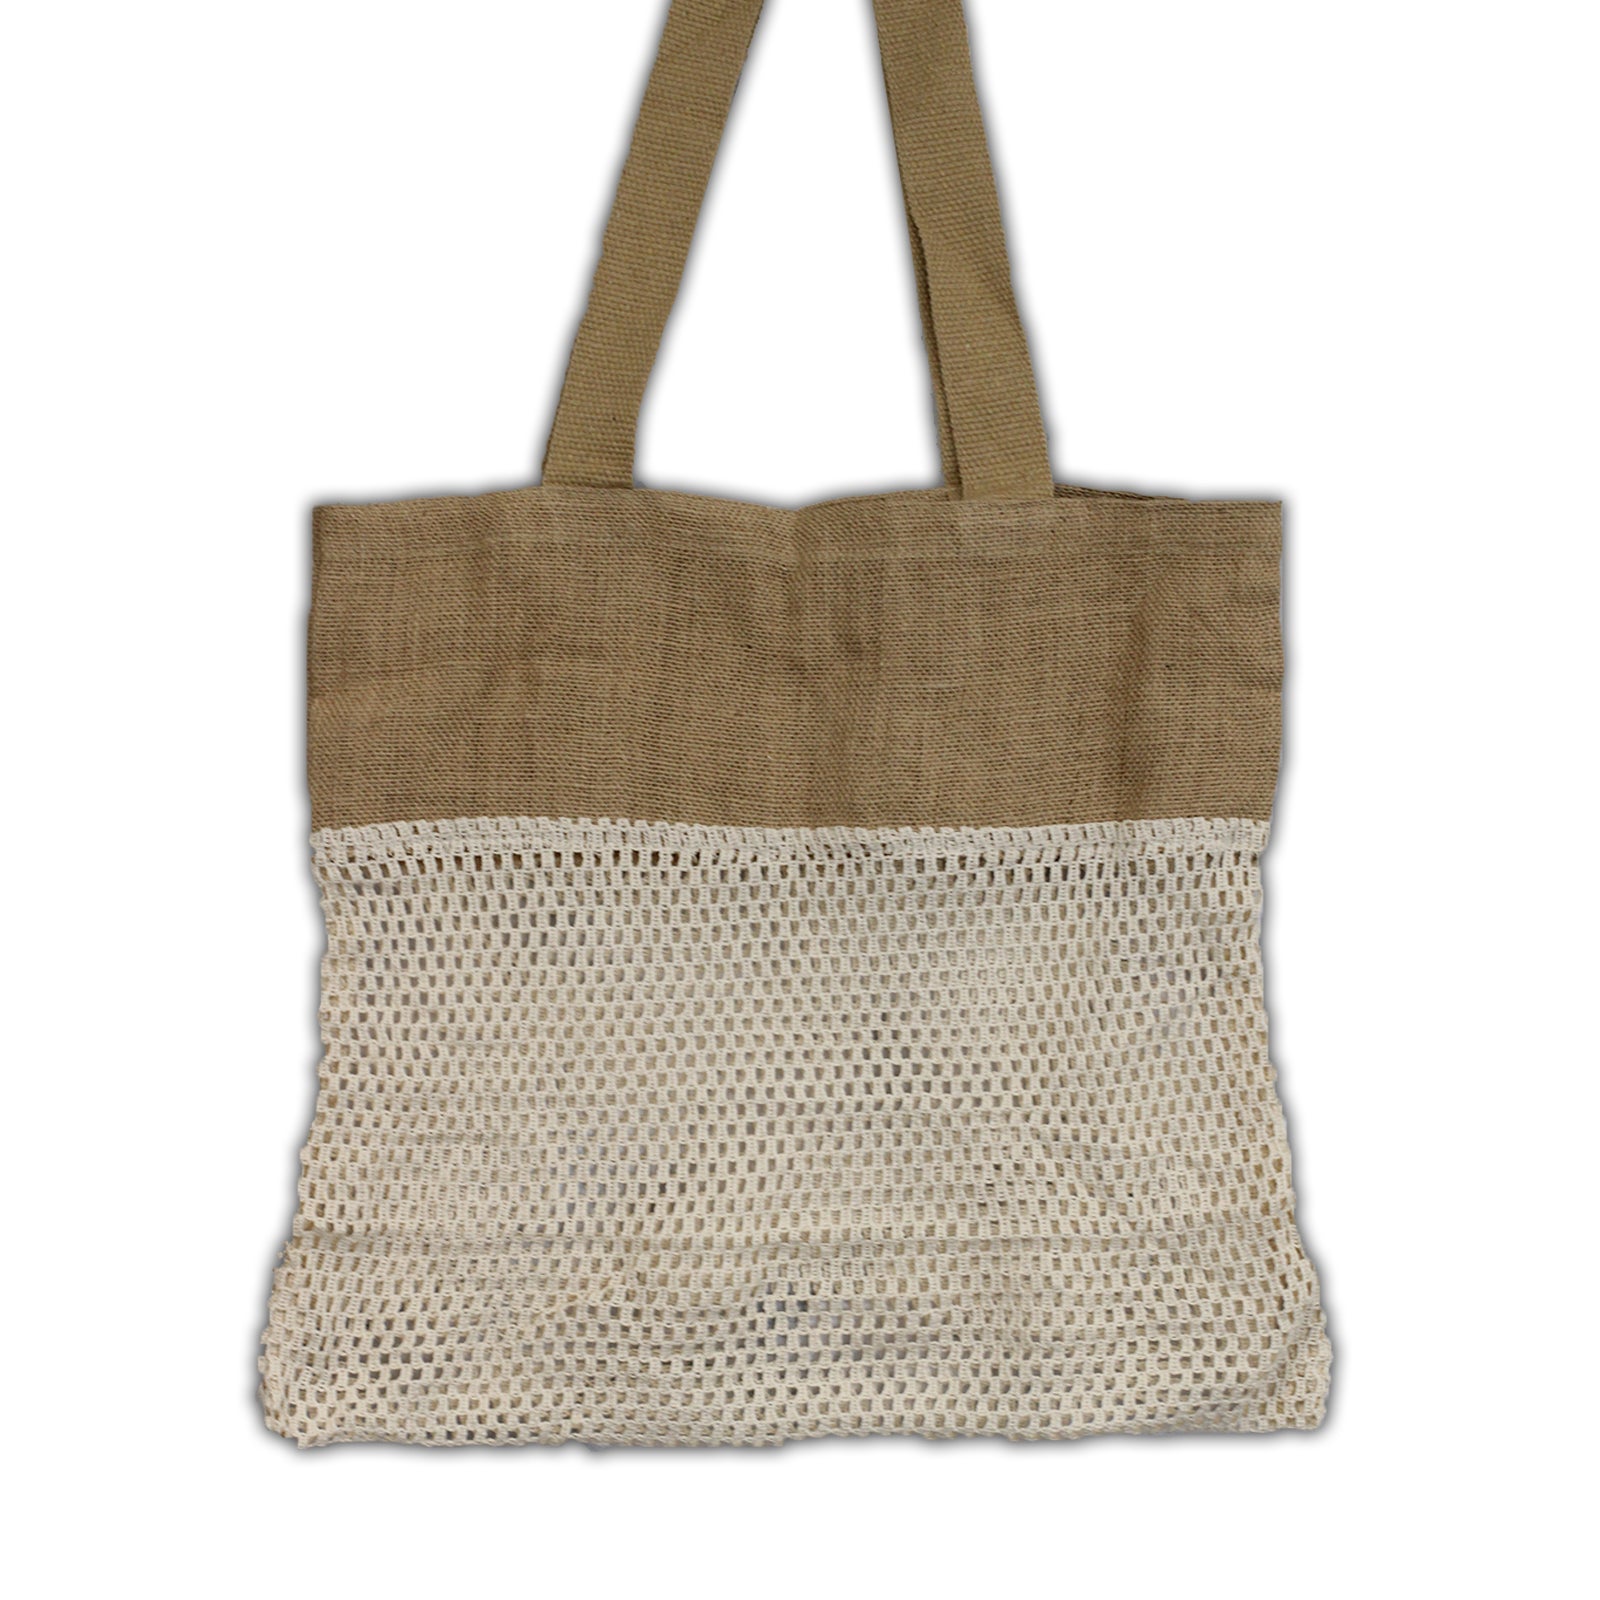 View Pure Soft Jute and Cotton Mesh Bag Natural information